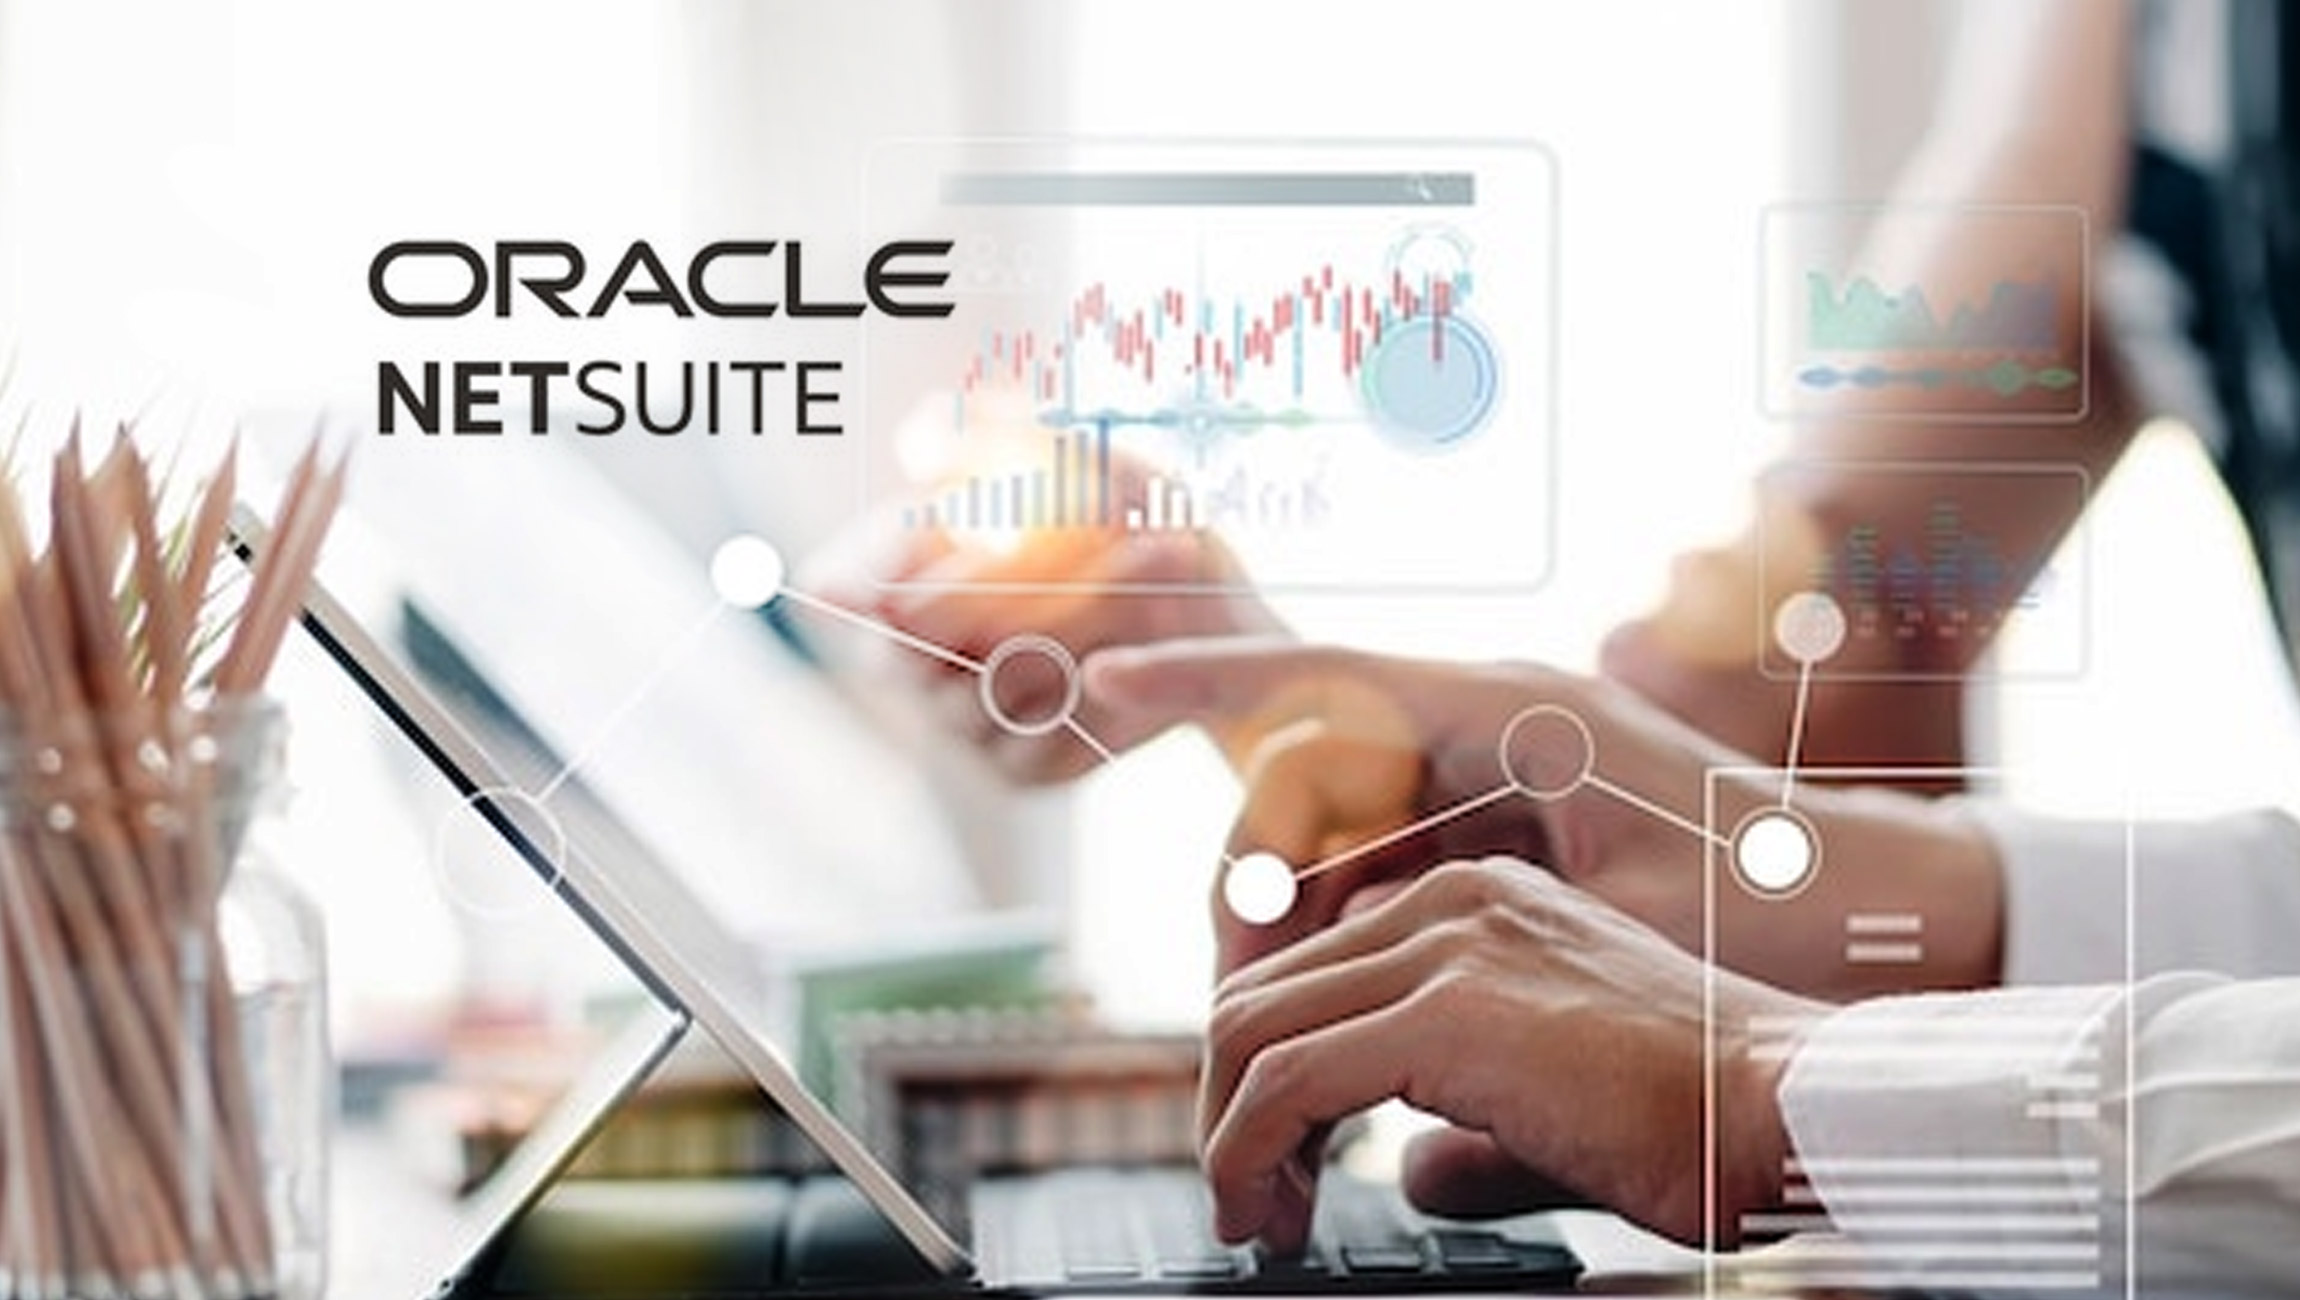 NetSuite Introduces Configure, Price, Quote Solution to Help Organizations Accelerate and Simplify the Sales Process